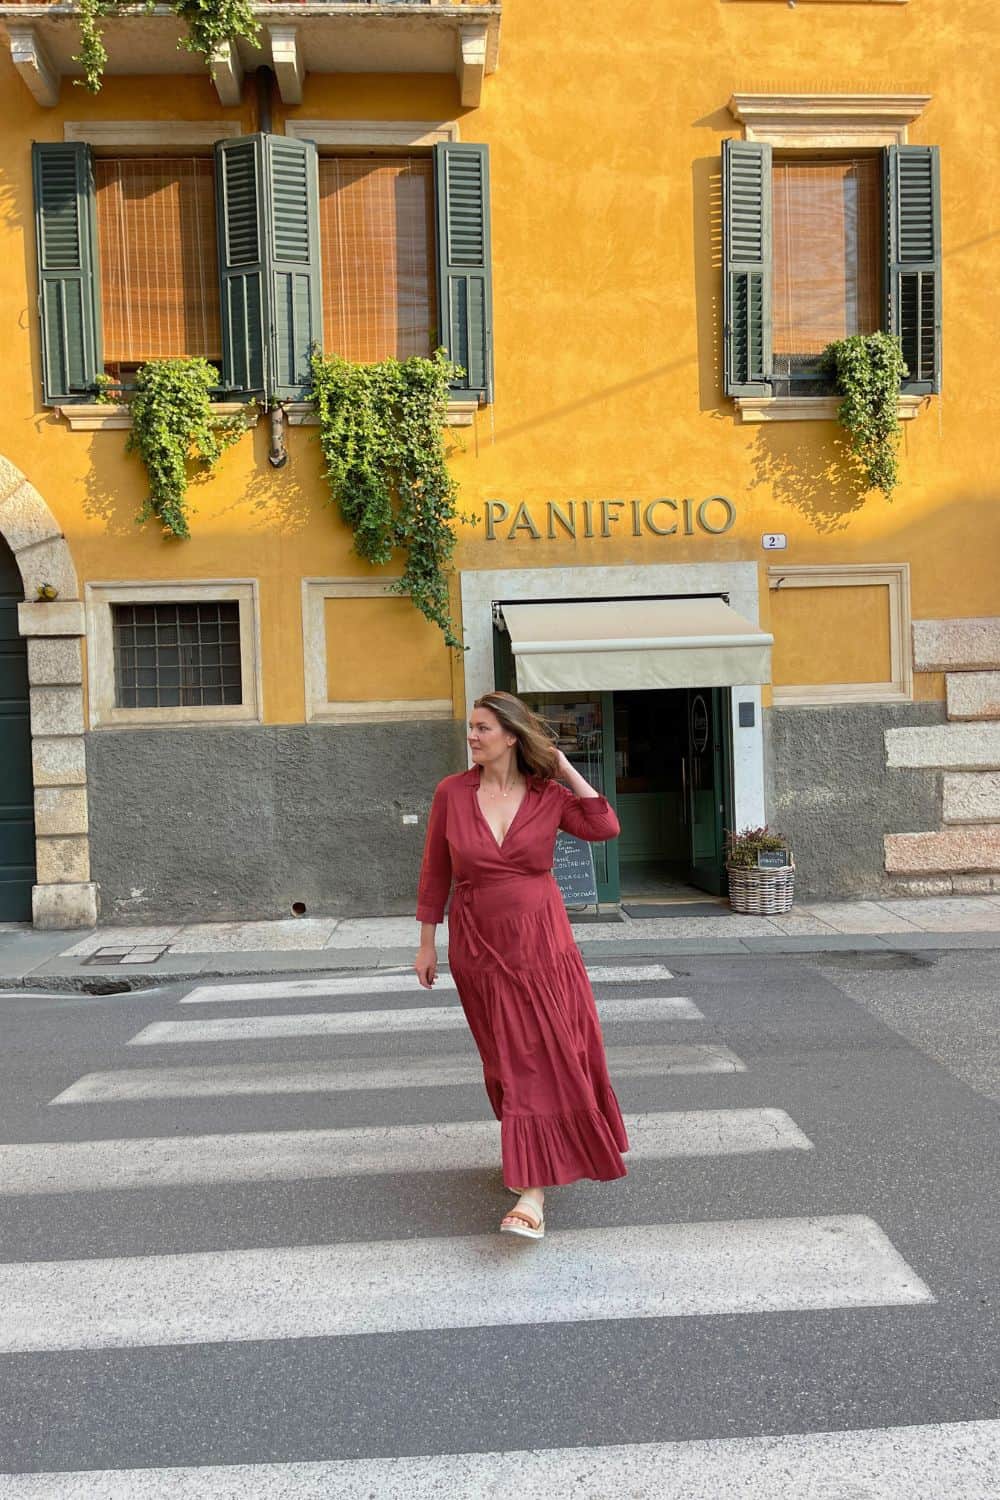 A woman crossing the streets in Verona